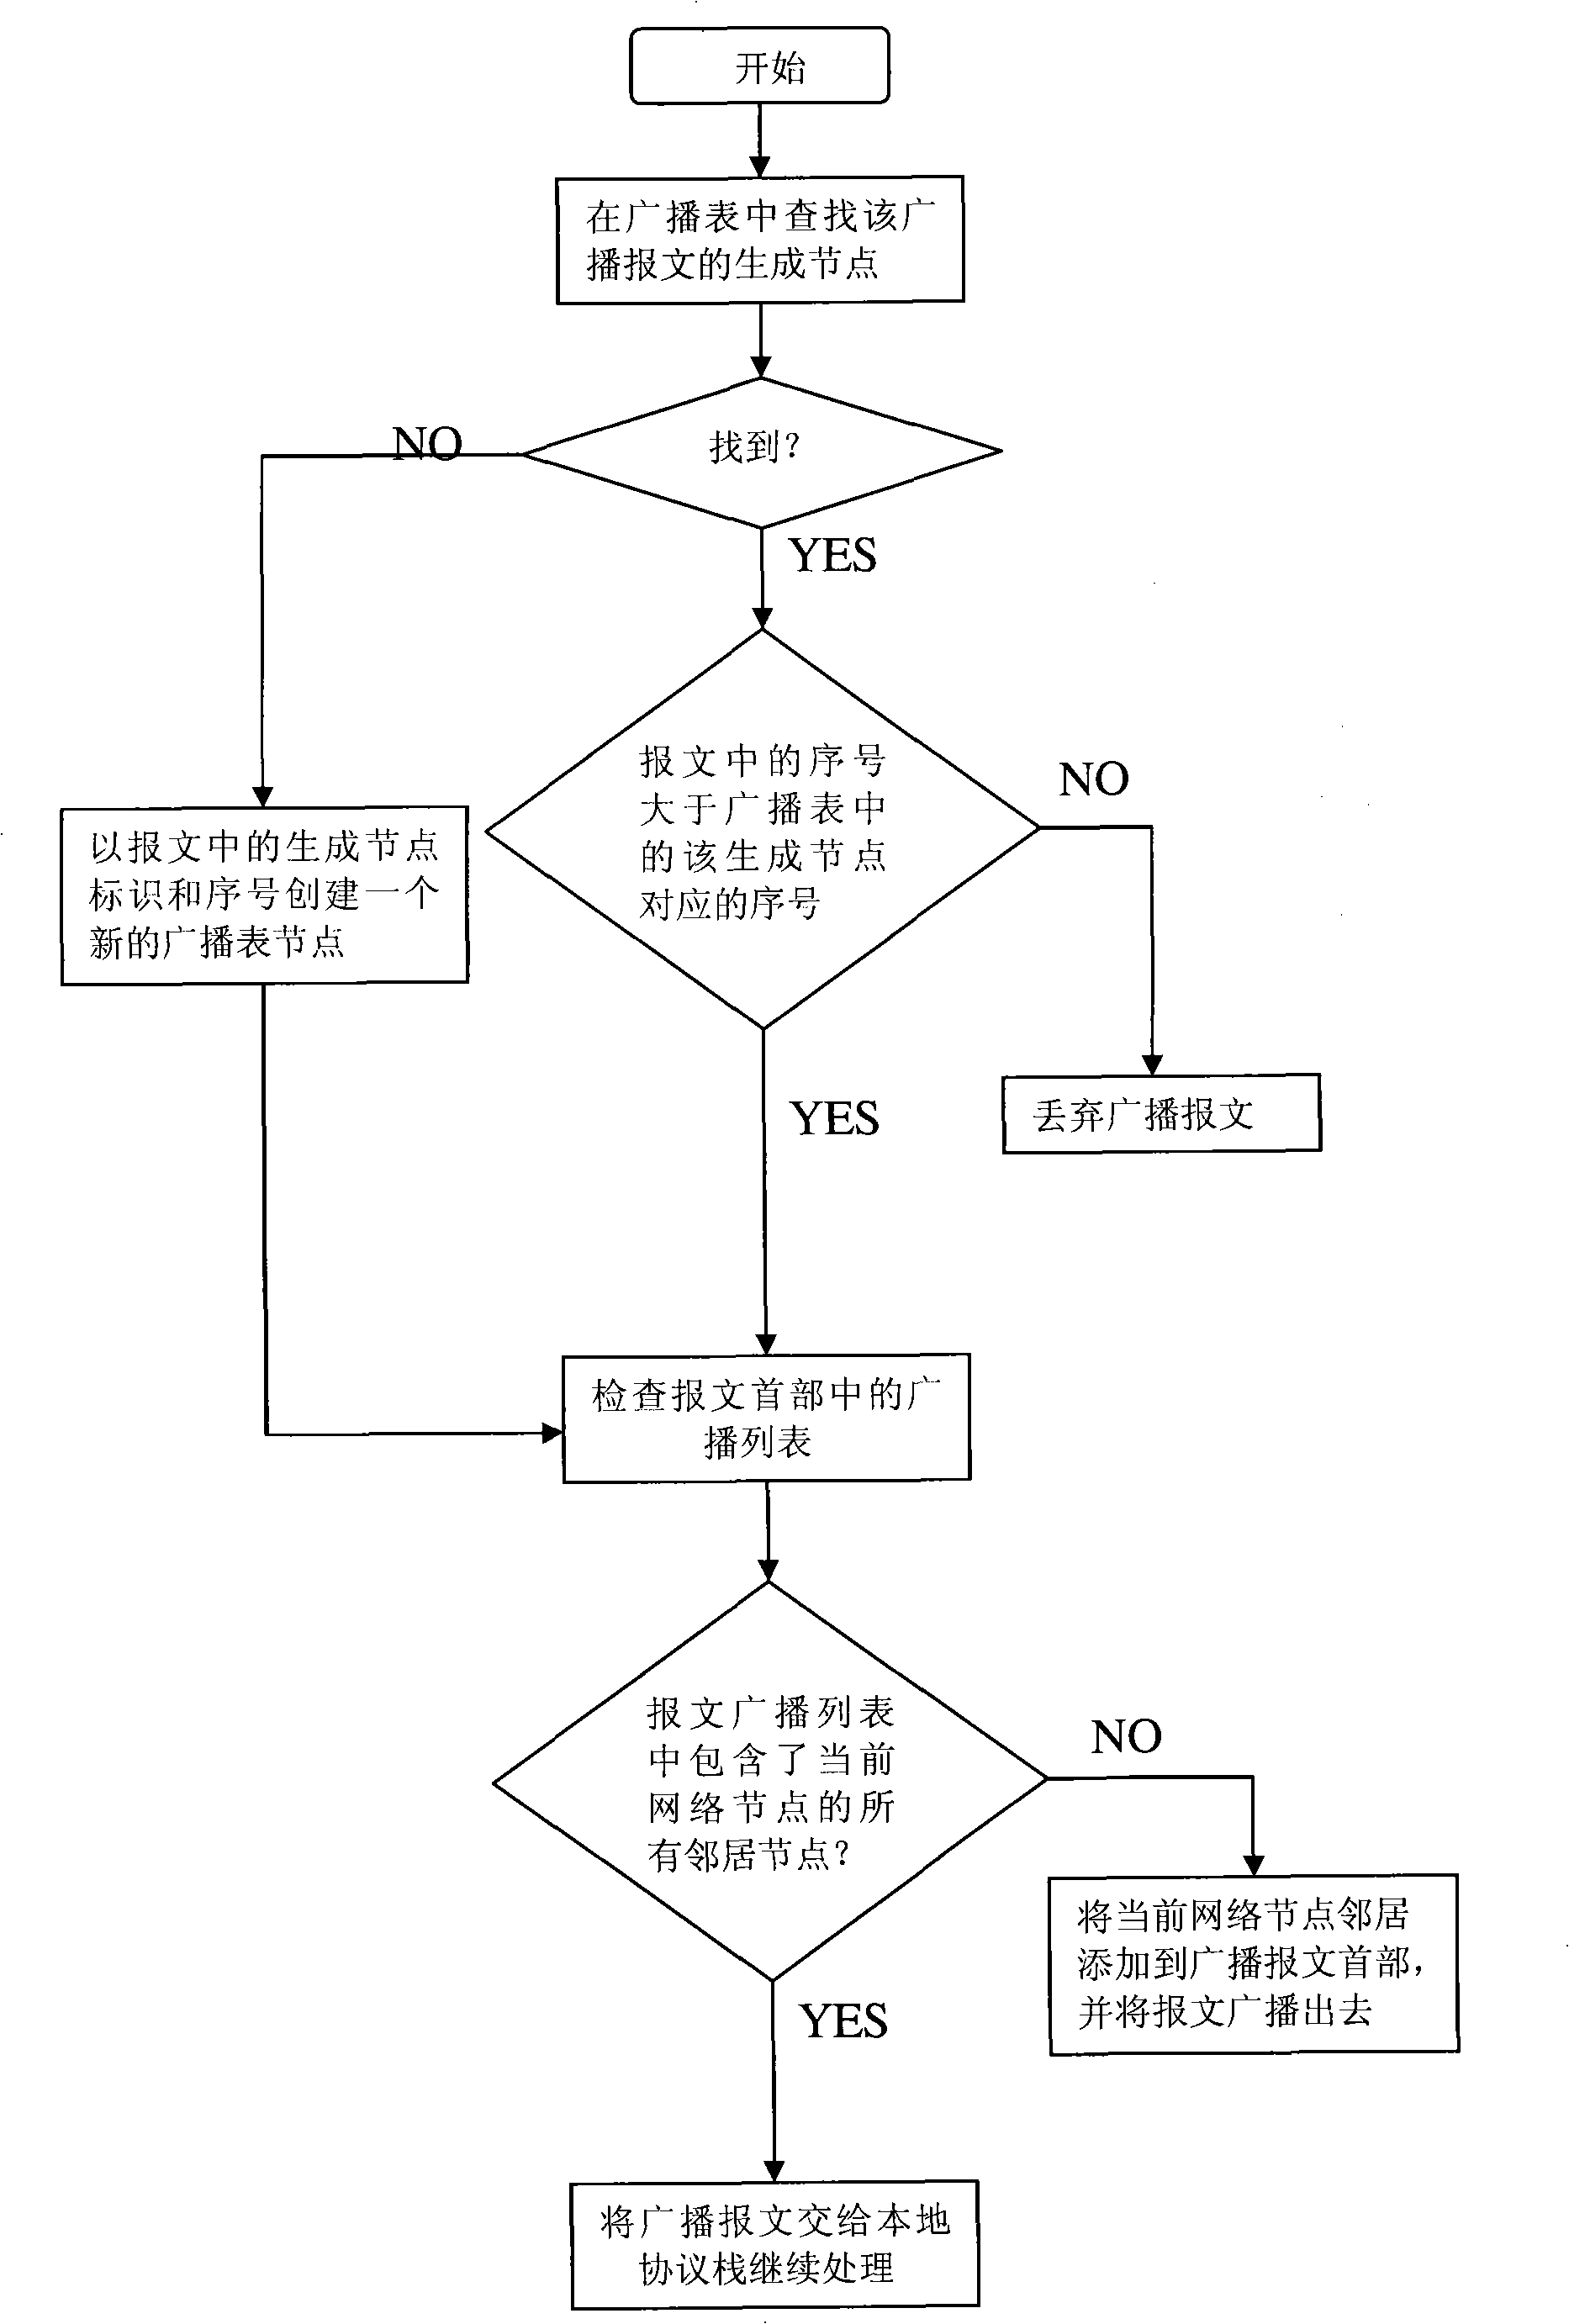 Method for diffusing route